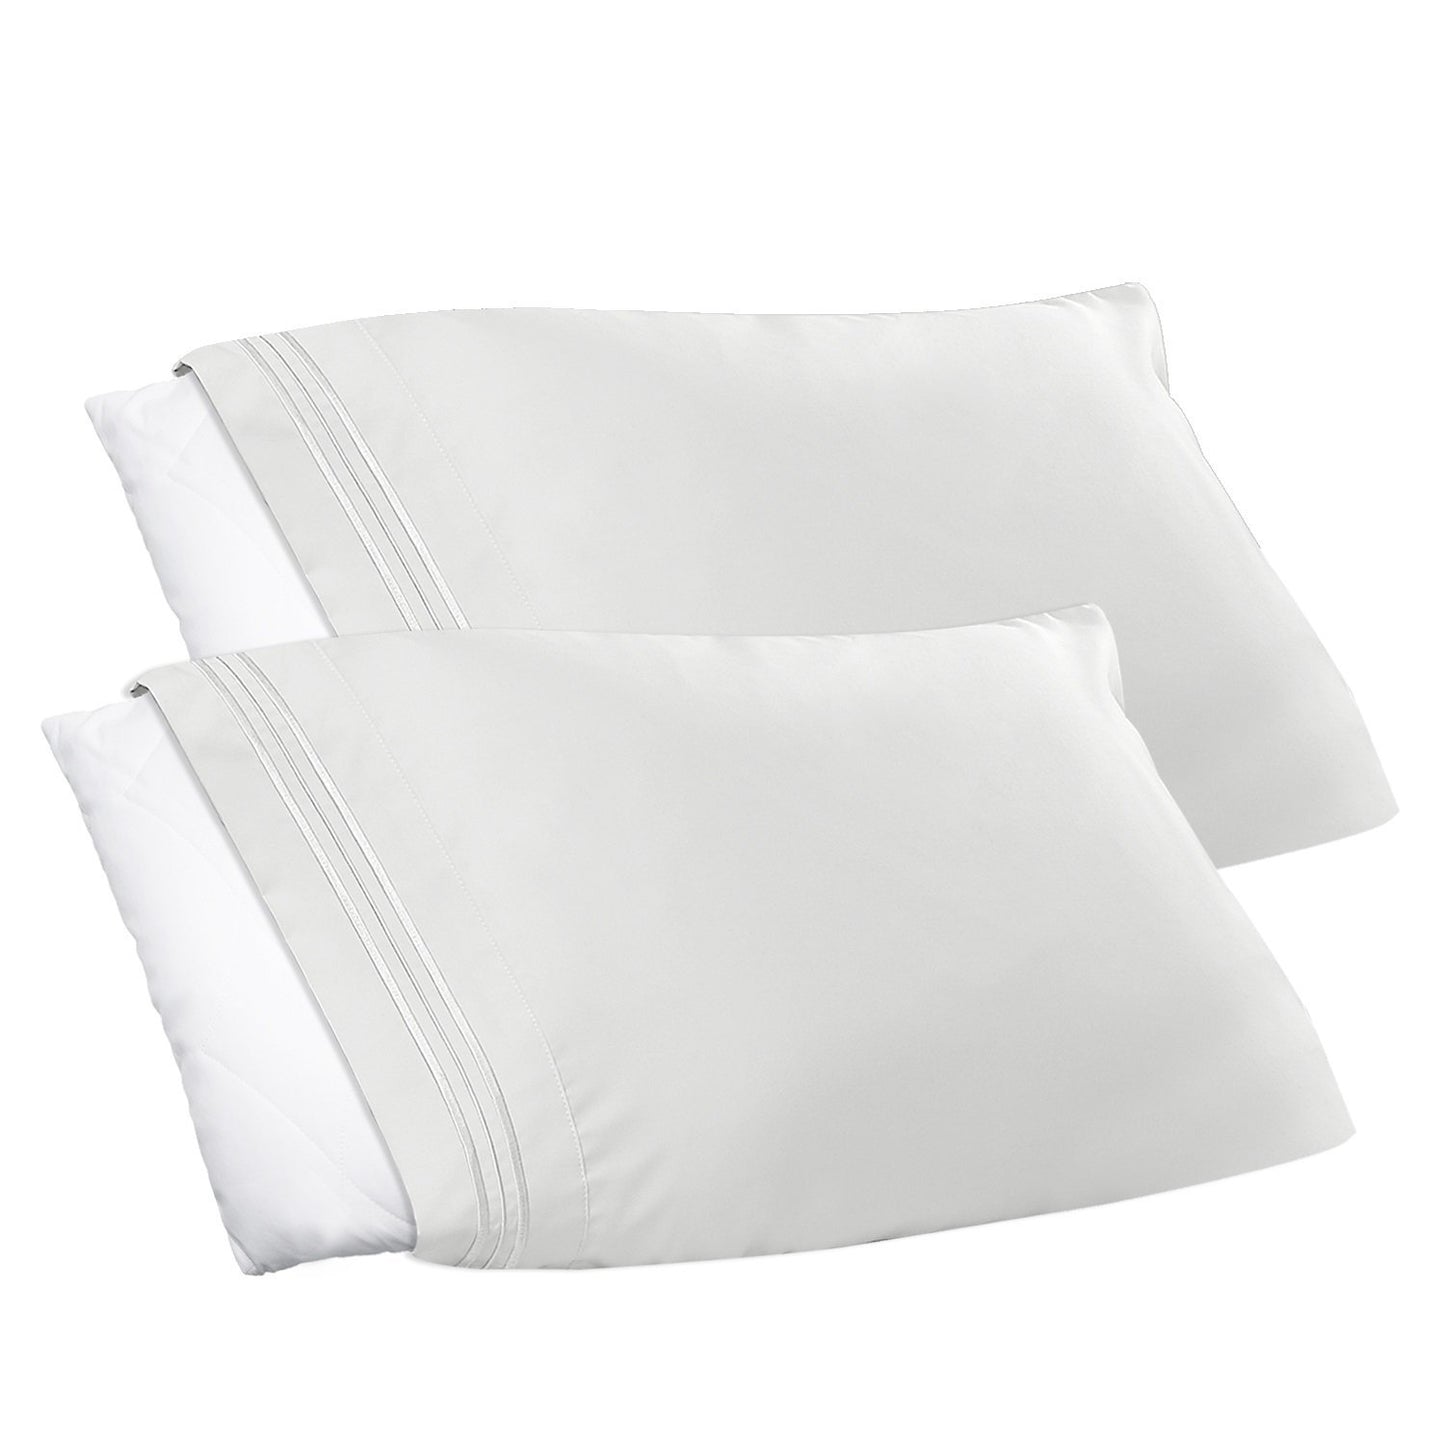 Nestl Bedding Soft Pillow Case Set of 2 - Double Brushed Microfiber Hypoallergenic Pillow Covers - 1800 Series Premium Bed Pillow Cases